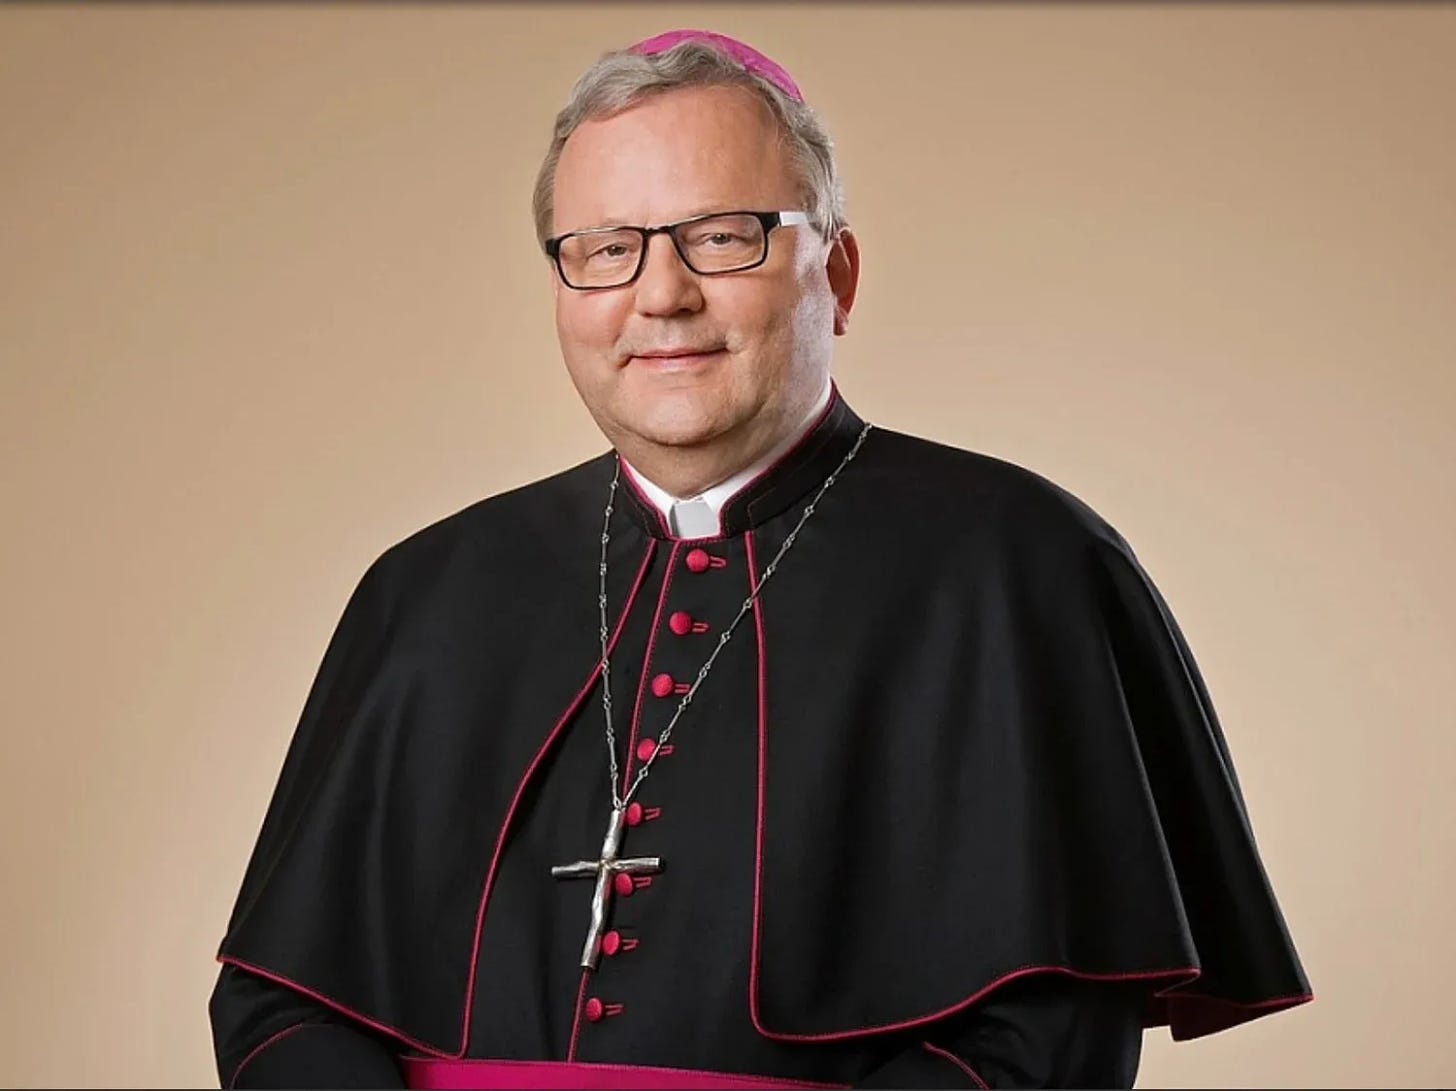 What Bishop Bode's decision means for accountability